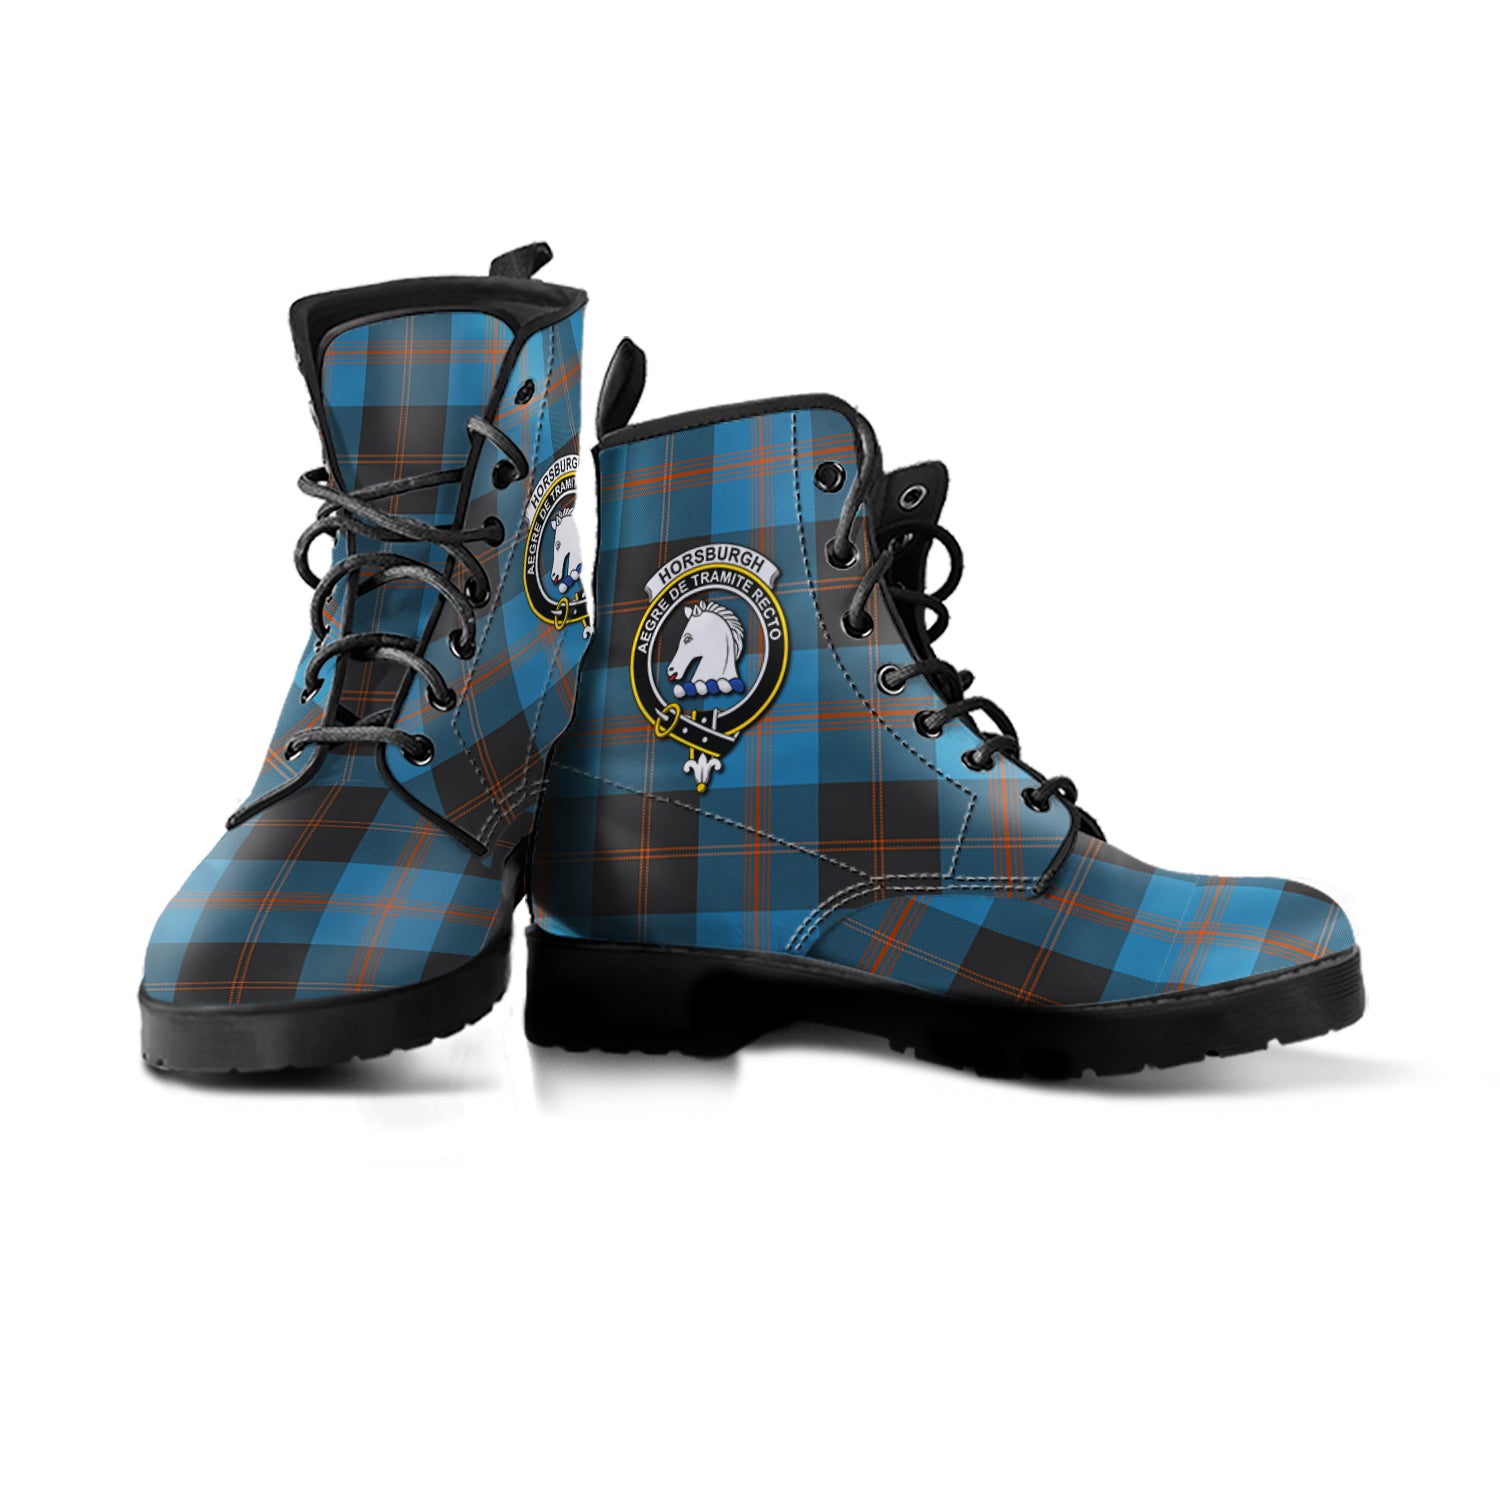 horsburgh-tartan-leather-boots-with-family-crest